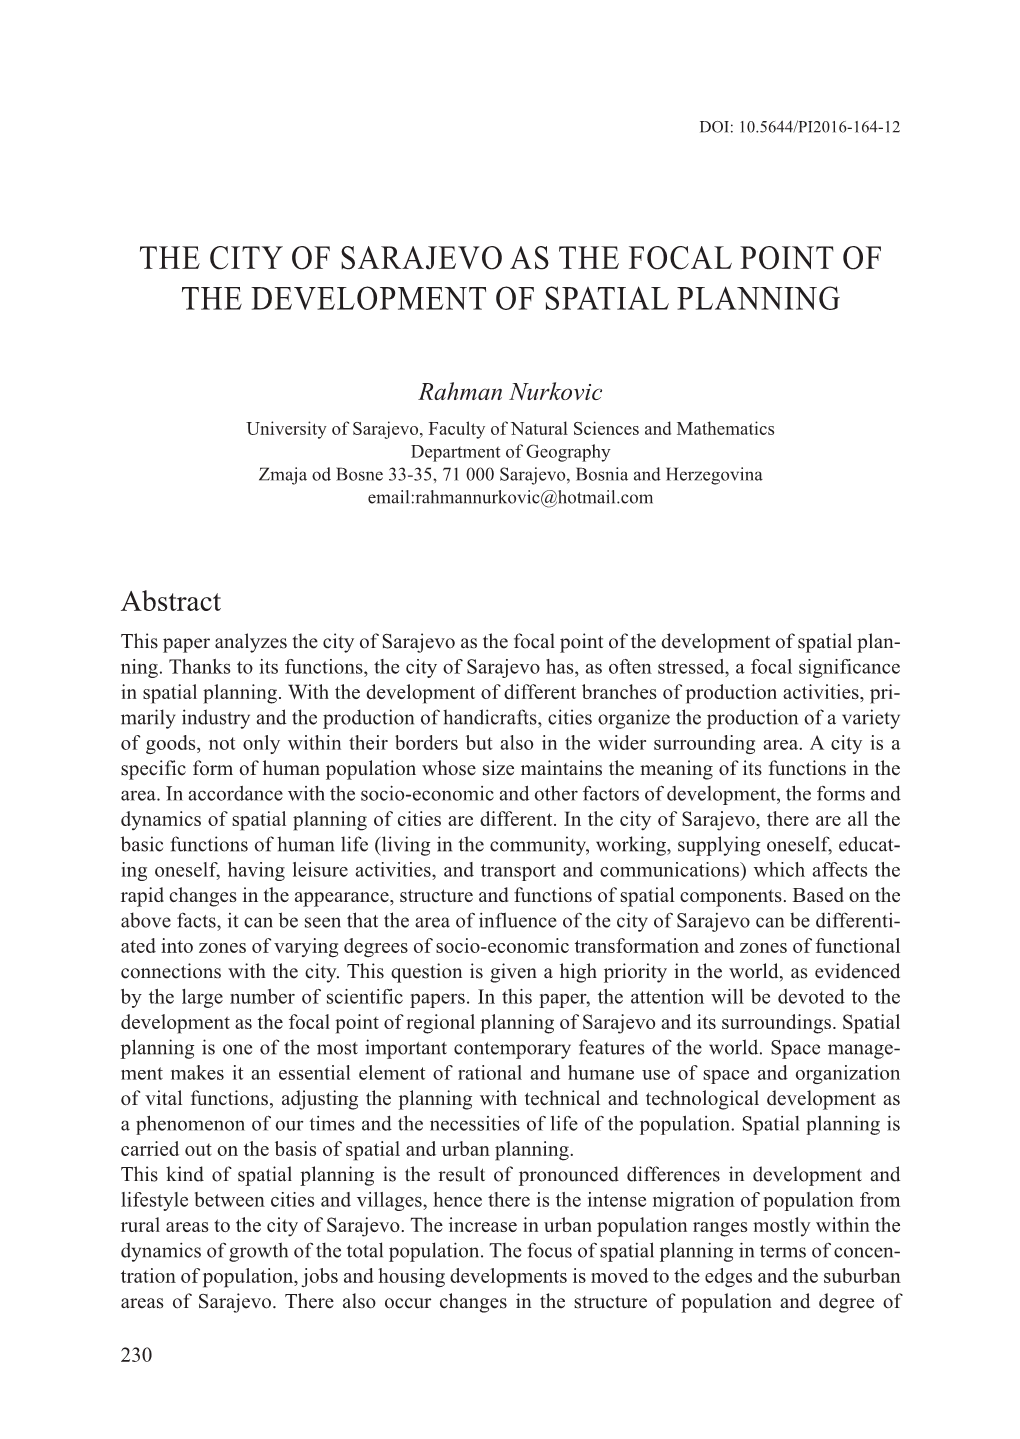 The City of Sarajevo As the Focal Point of the Development of Spatial Planning